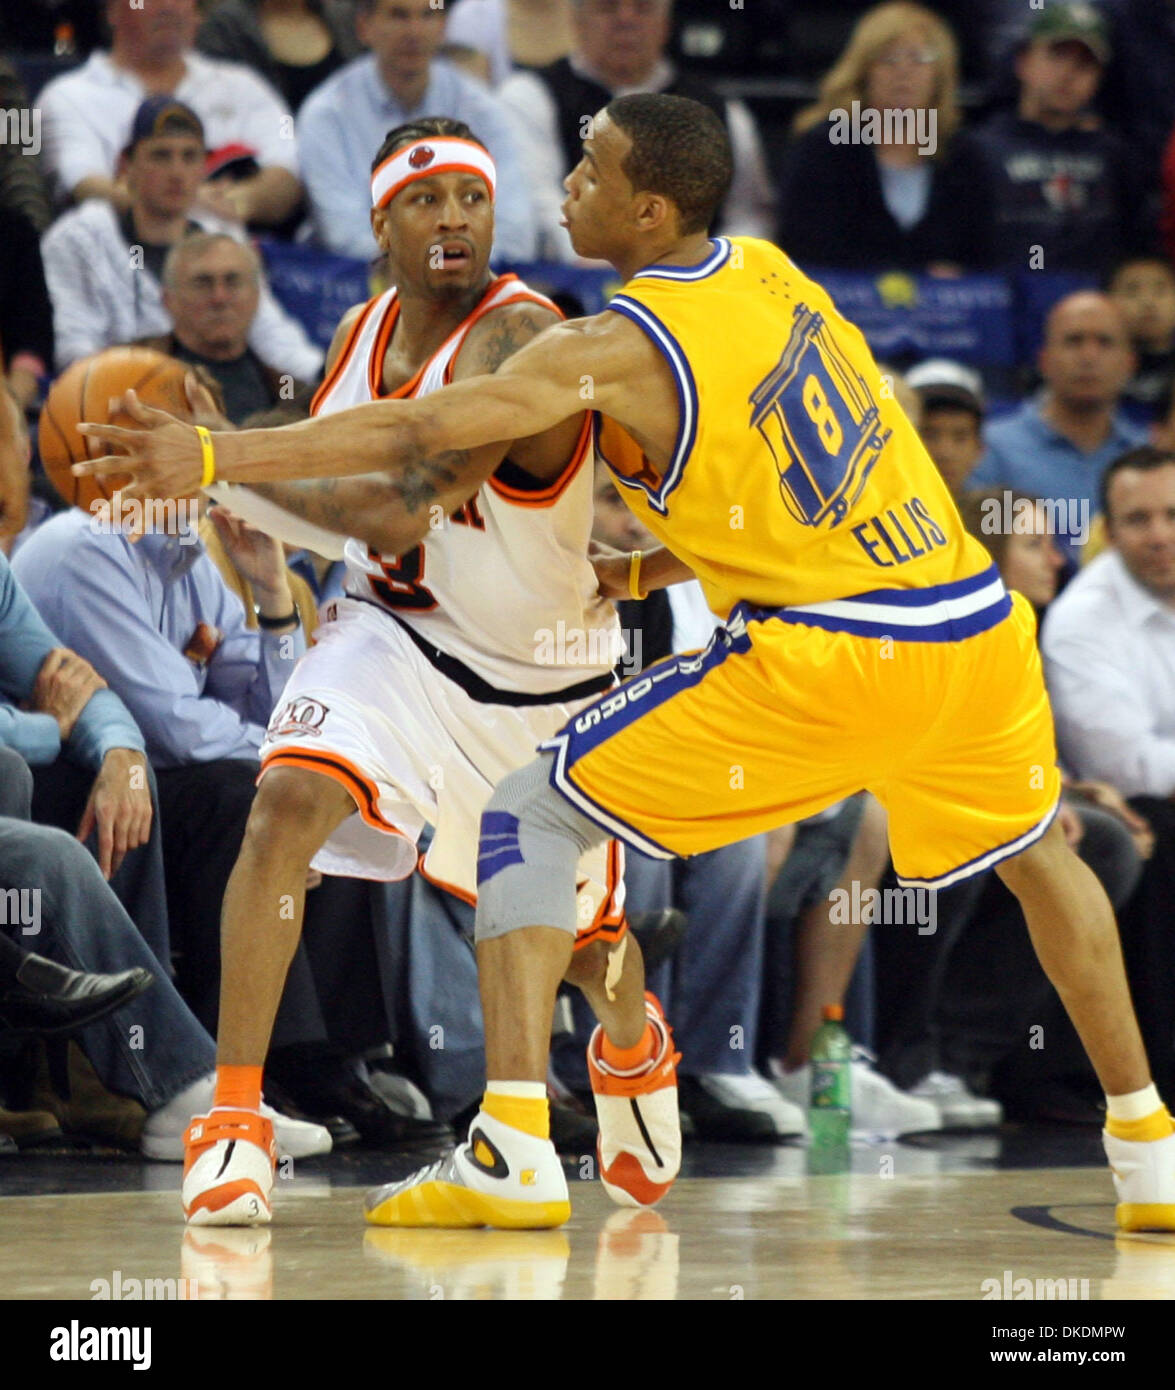 Mar 07, 2007 - Oakland, CA, USA - Denver Nuggets' ALLEN IVERSON, left, looks for an open man around Golden State Warriors defender MONTA ELLIS in the fourth quarter, Wednesday, March 7, 2007 in Oakland, Calif. The Warriors kept their slim playoff hopes alive with a 110-96 win.  (Credit Image: © D. Ross Cameron/Oakland Tribune/ZUMA Press) RESTRICTIONS: USA Tabloid RIGHTS OUT! Stock Photo